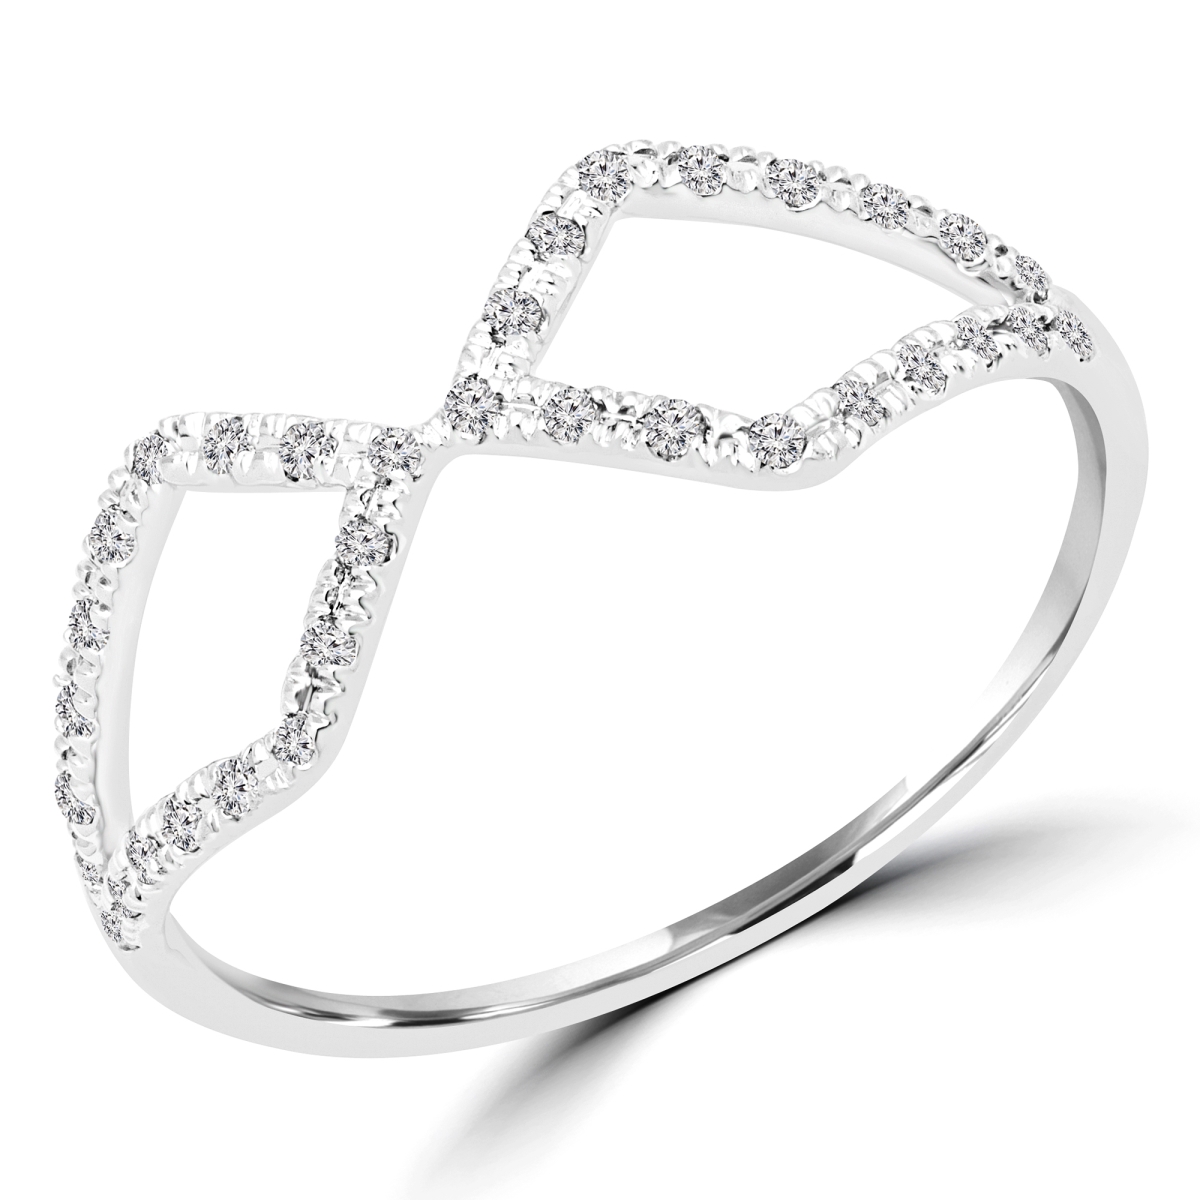 Picture of Majesty Diamonds MDR170055-9 0.13 CTW Round Diamond Cocktail Ring in 14K White Gold - Size 9